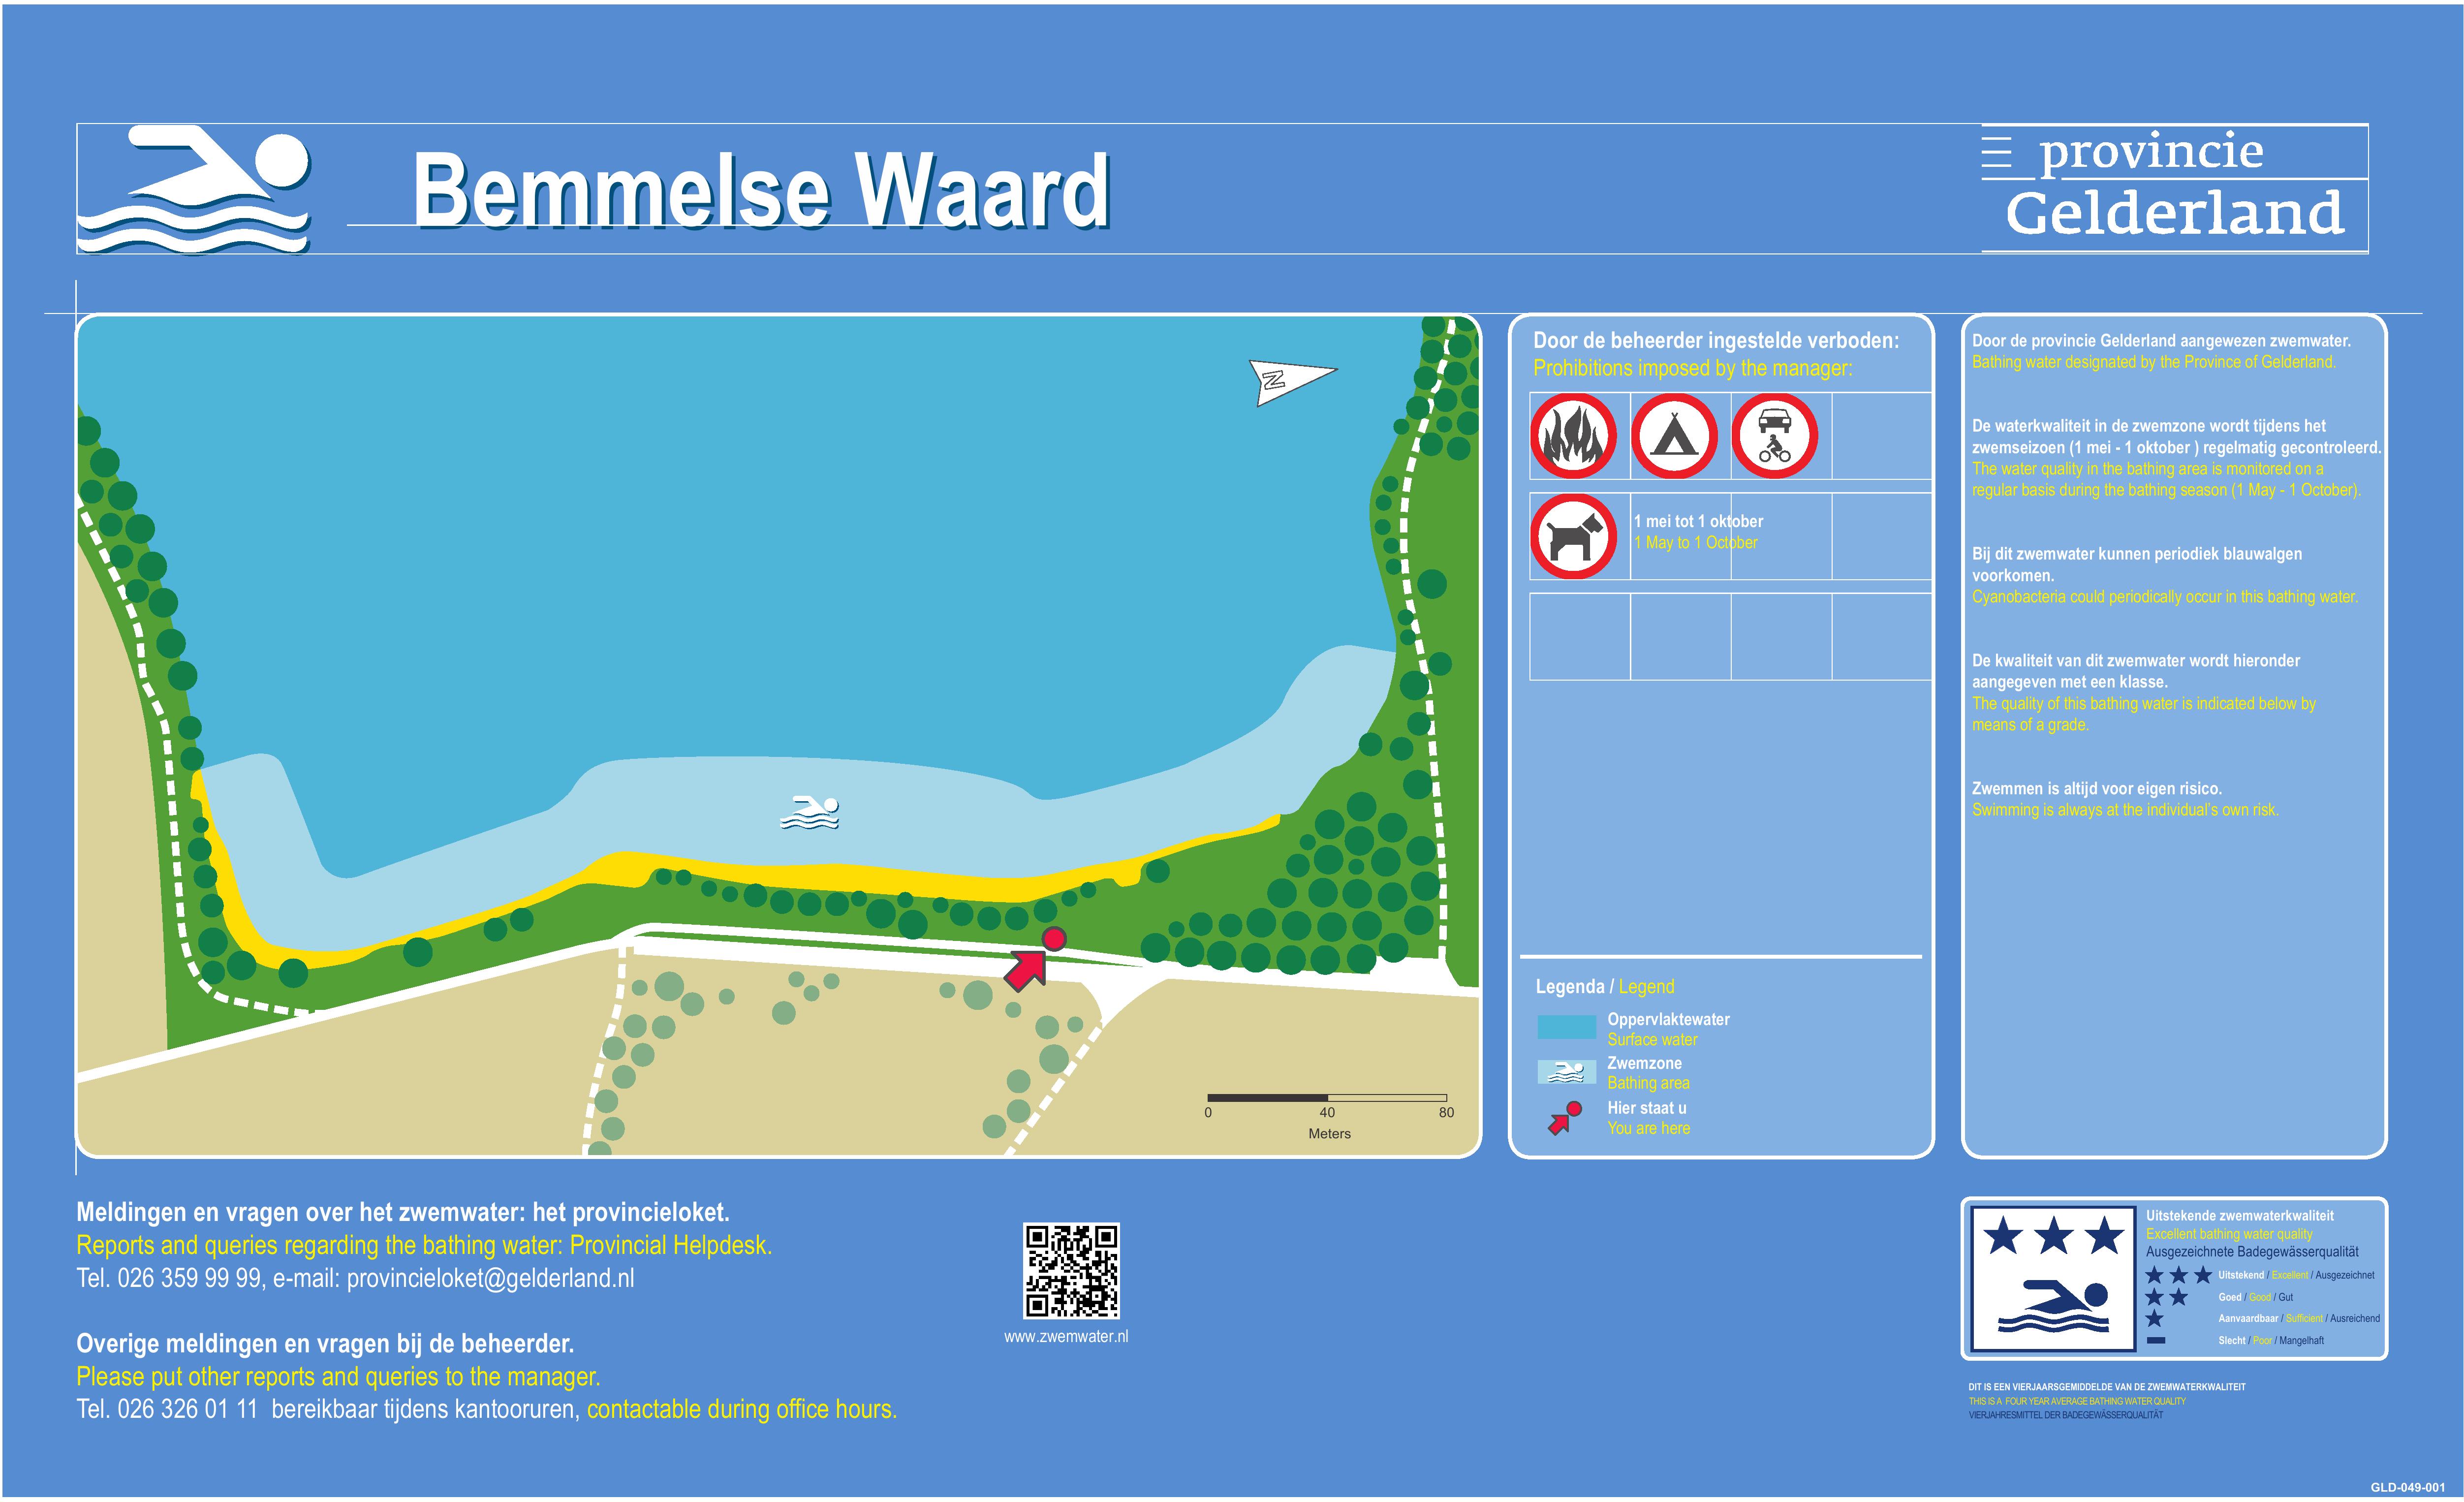 The information board at the swimming location Bemmelse Waard